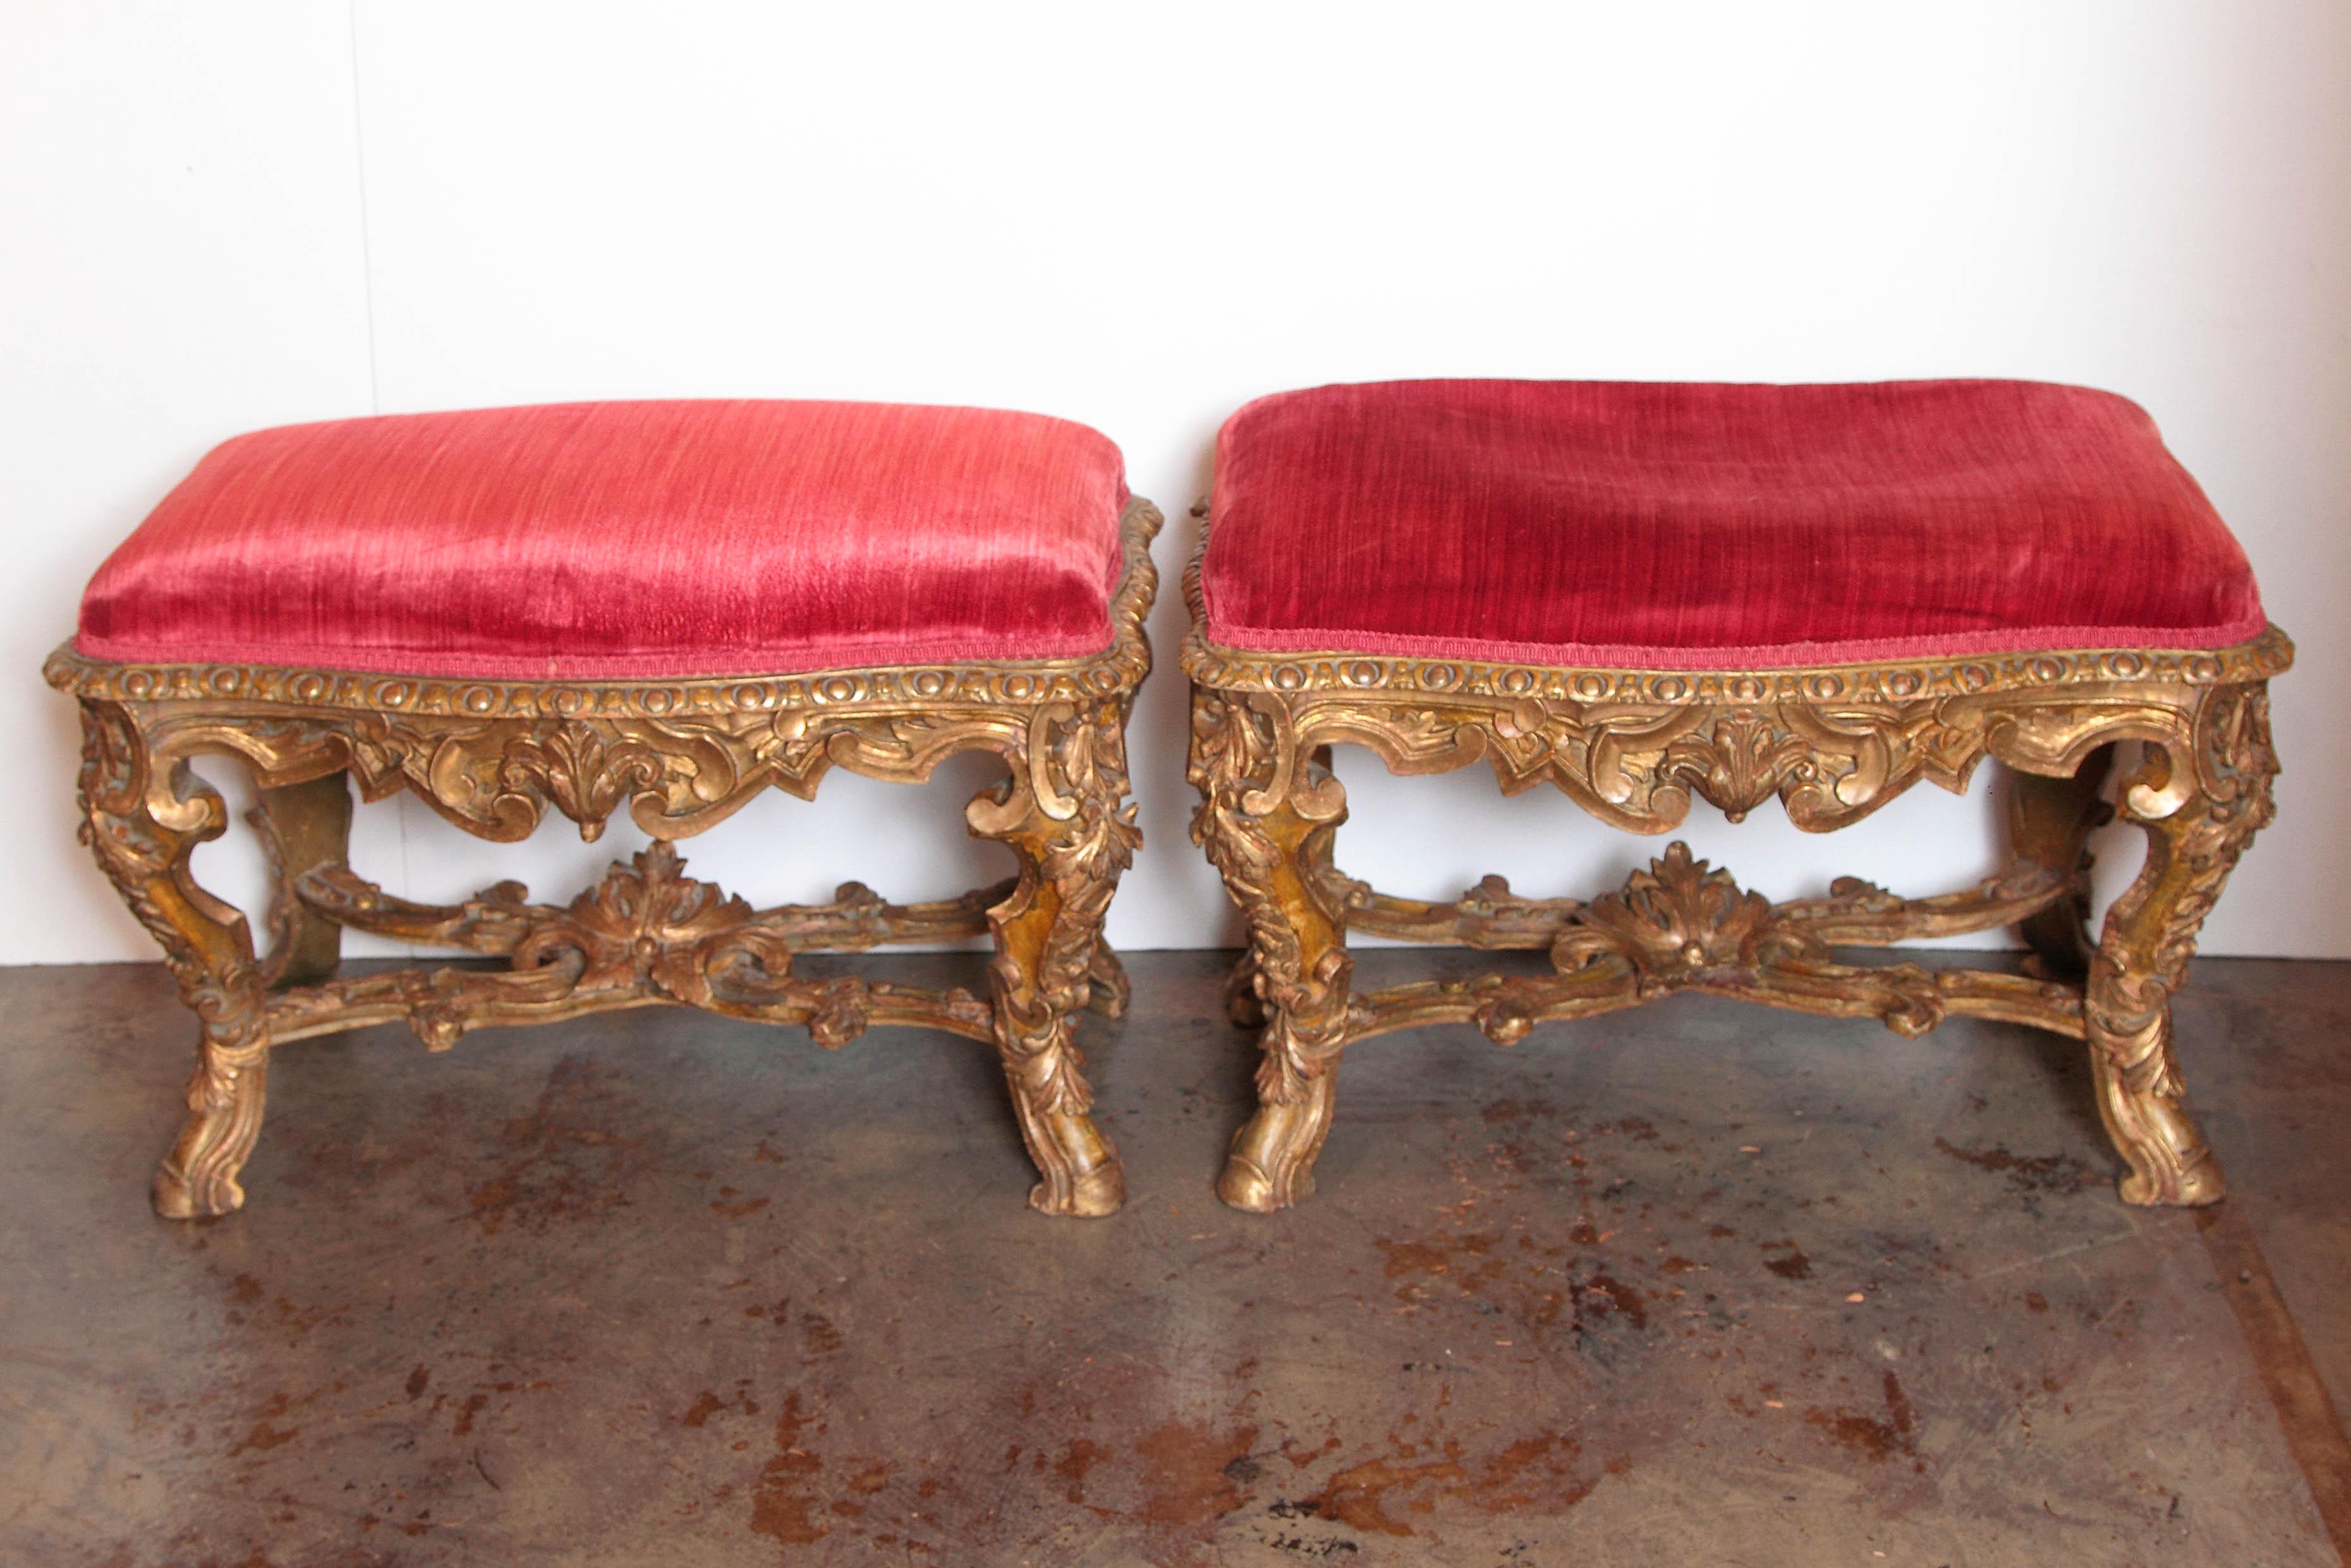 Pair of 18th century French Regence period carved and gilt benches.